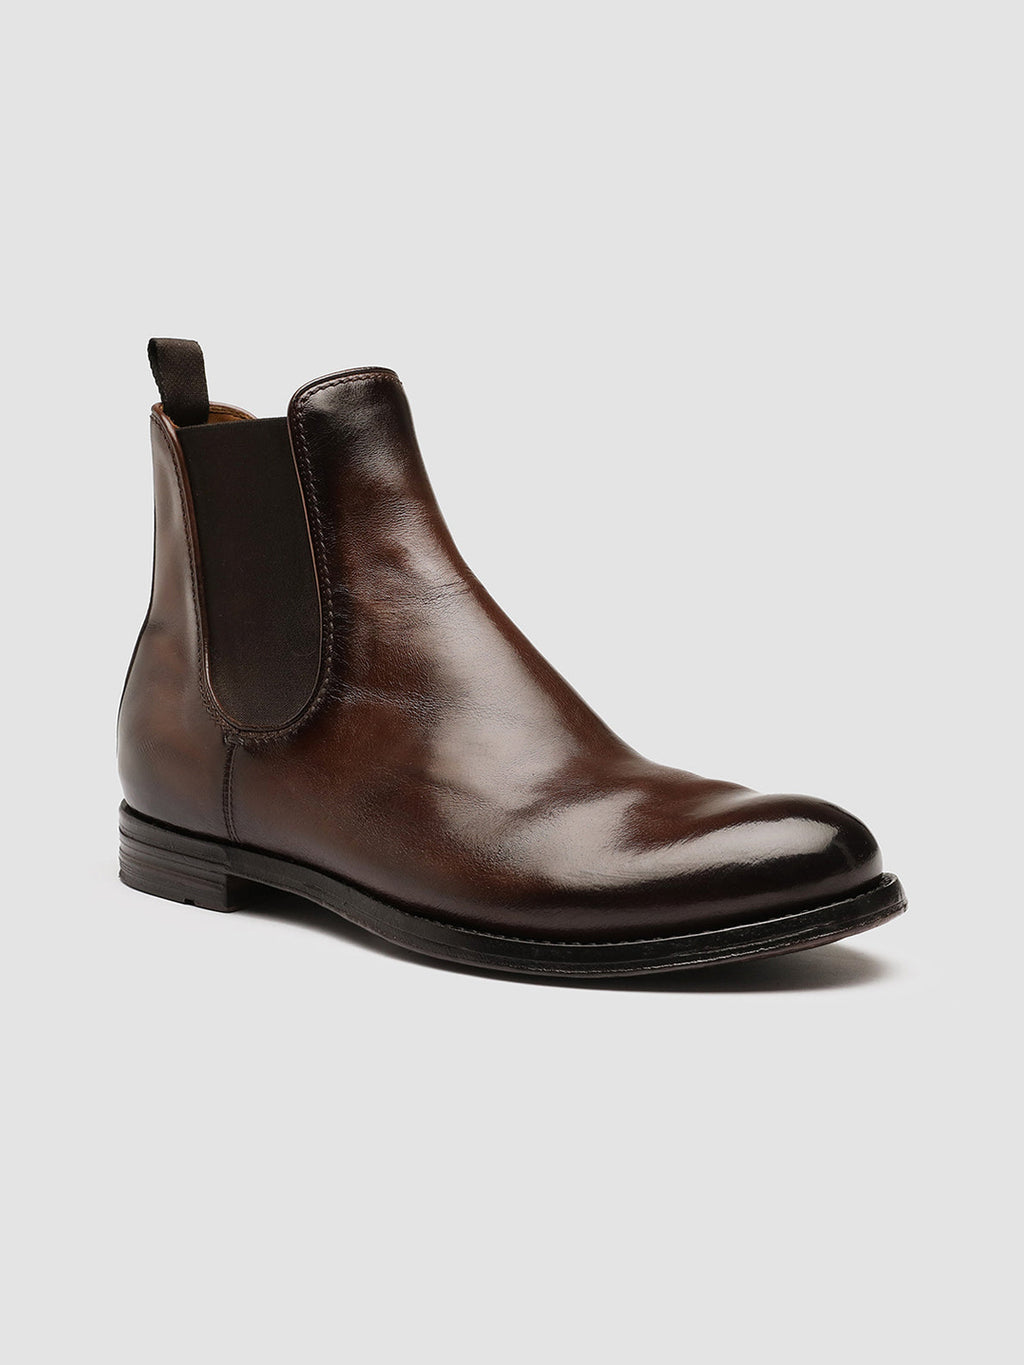 ANATOMIA 083 - Brown Leather Chelsea Boots Men Officine Creative - 3